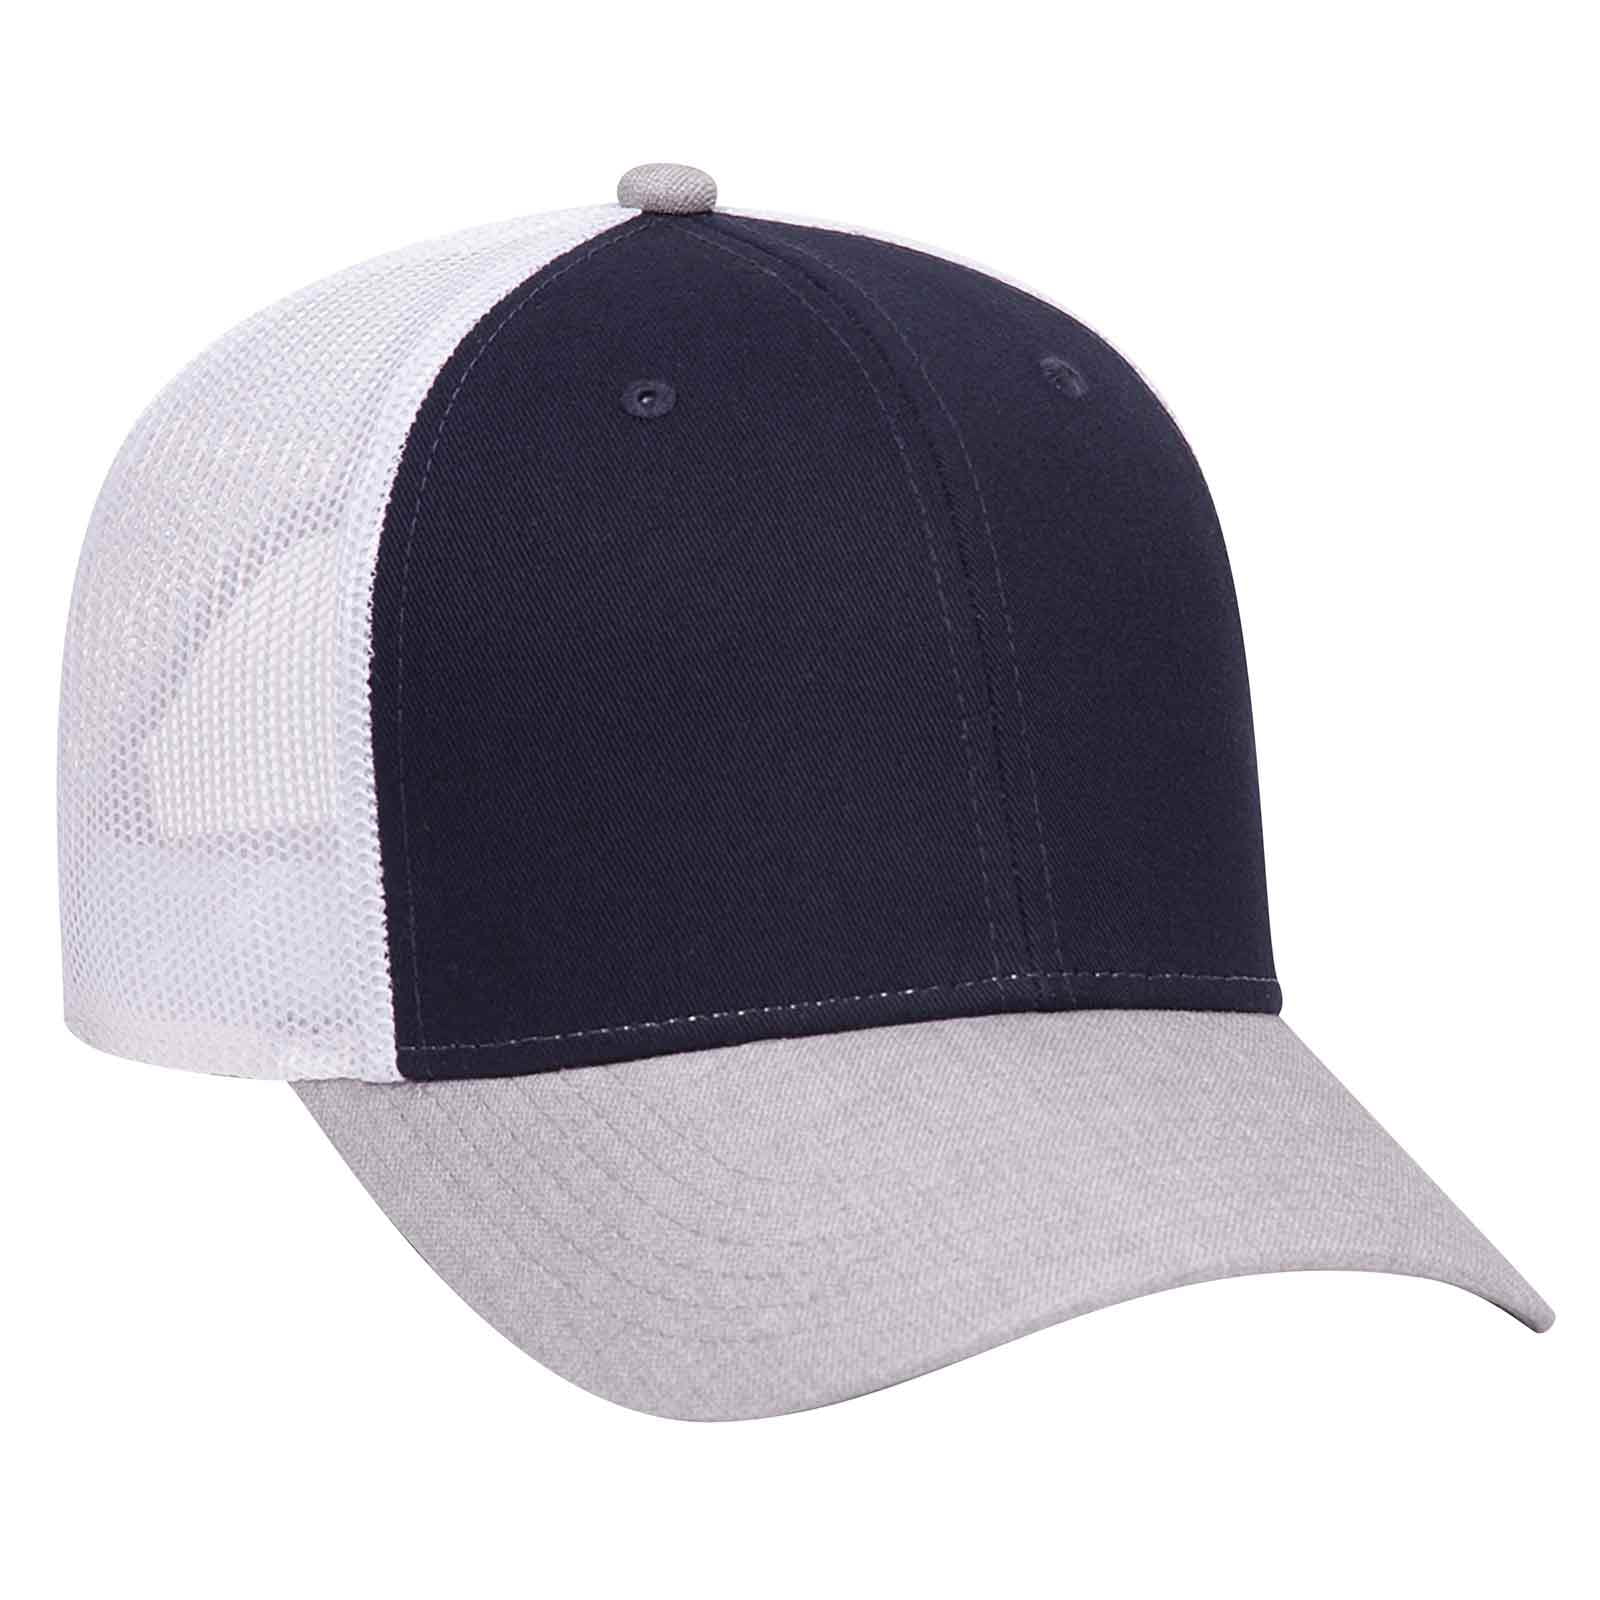 High Quality Low Profile Wash 6 panel Charcoal White Snap Back Trucker Mesh hat 